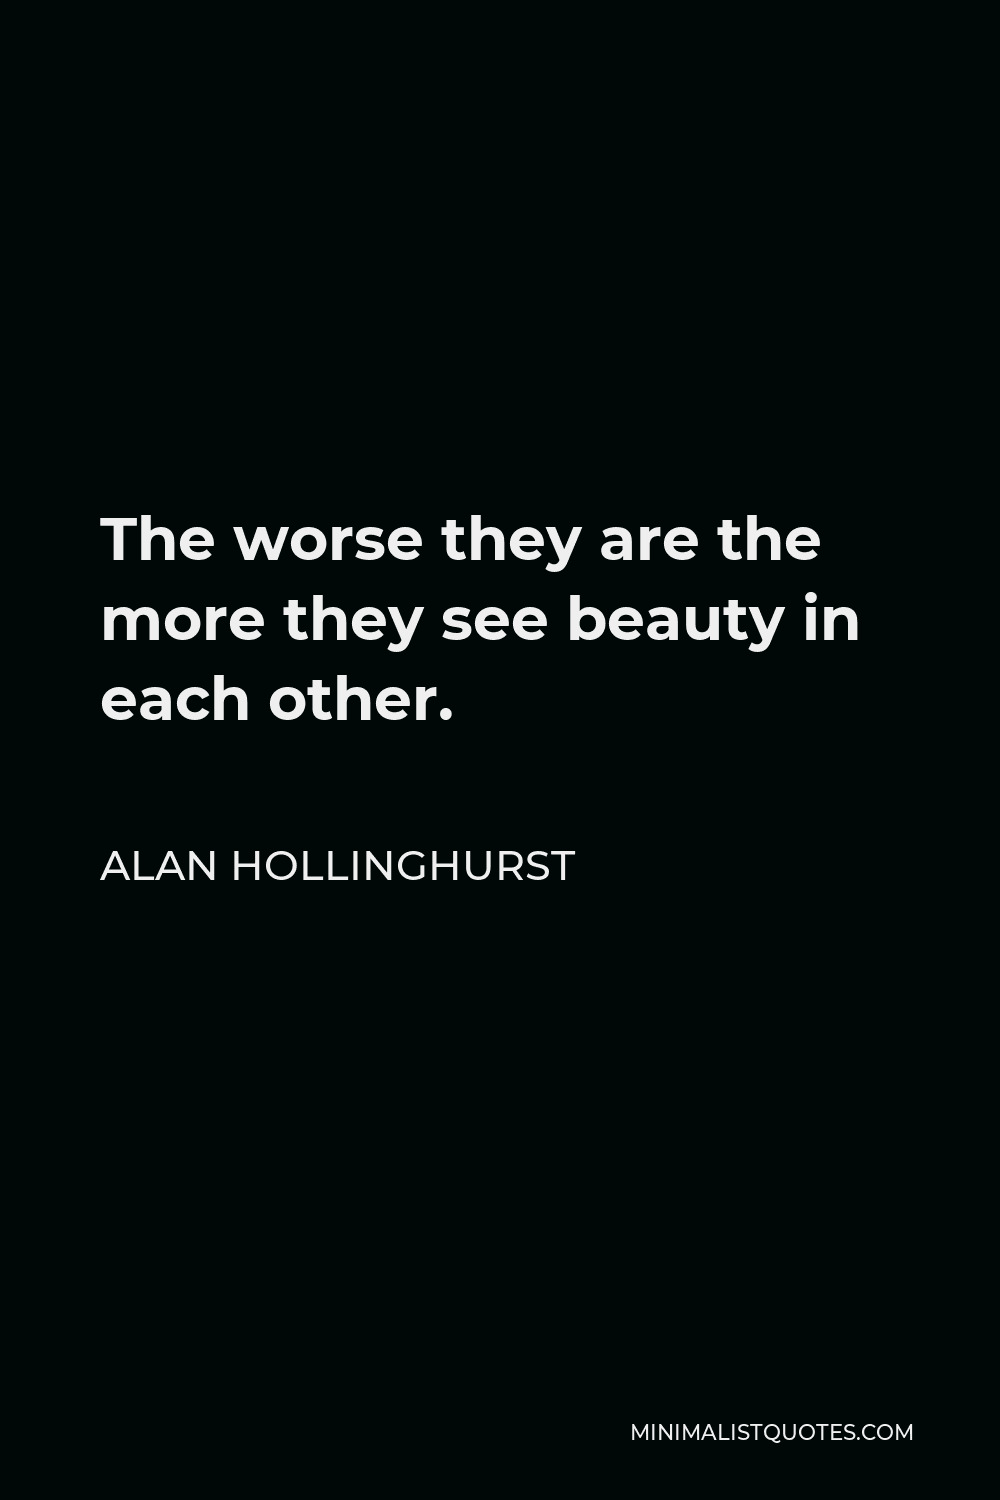 Alan Hollinghurst Quote - The worse they are the more they see beauty in each other.